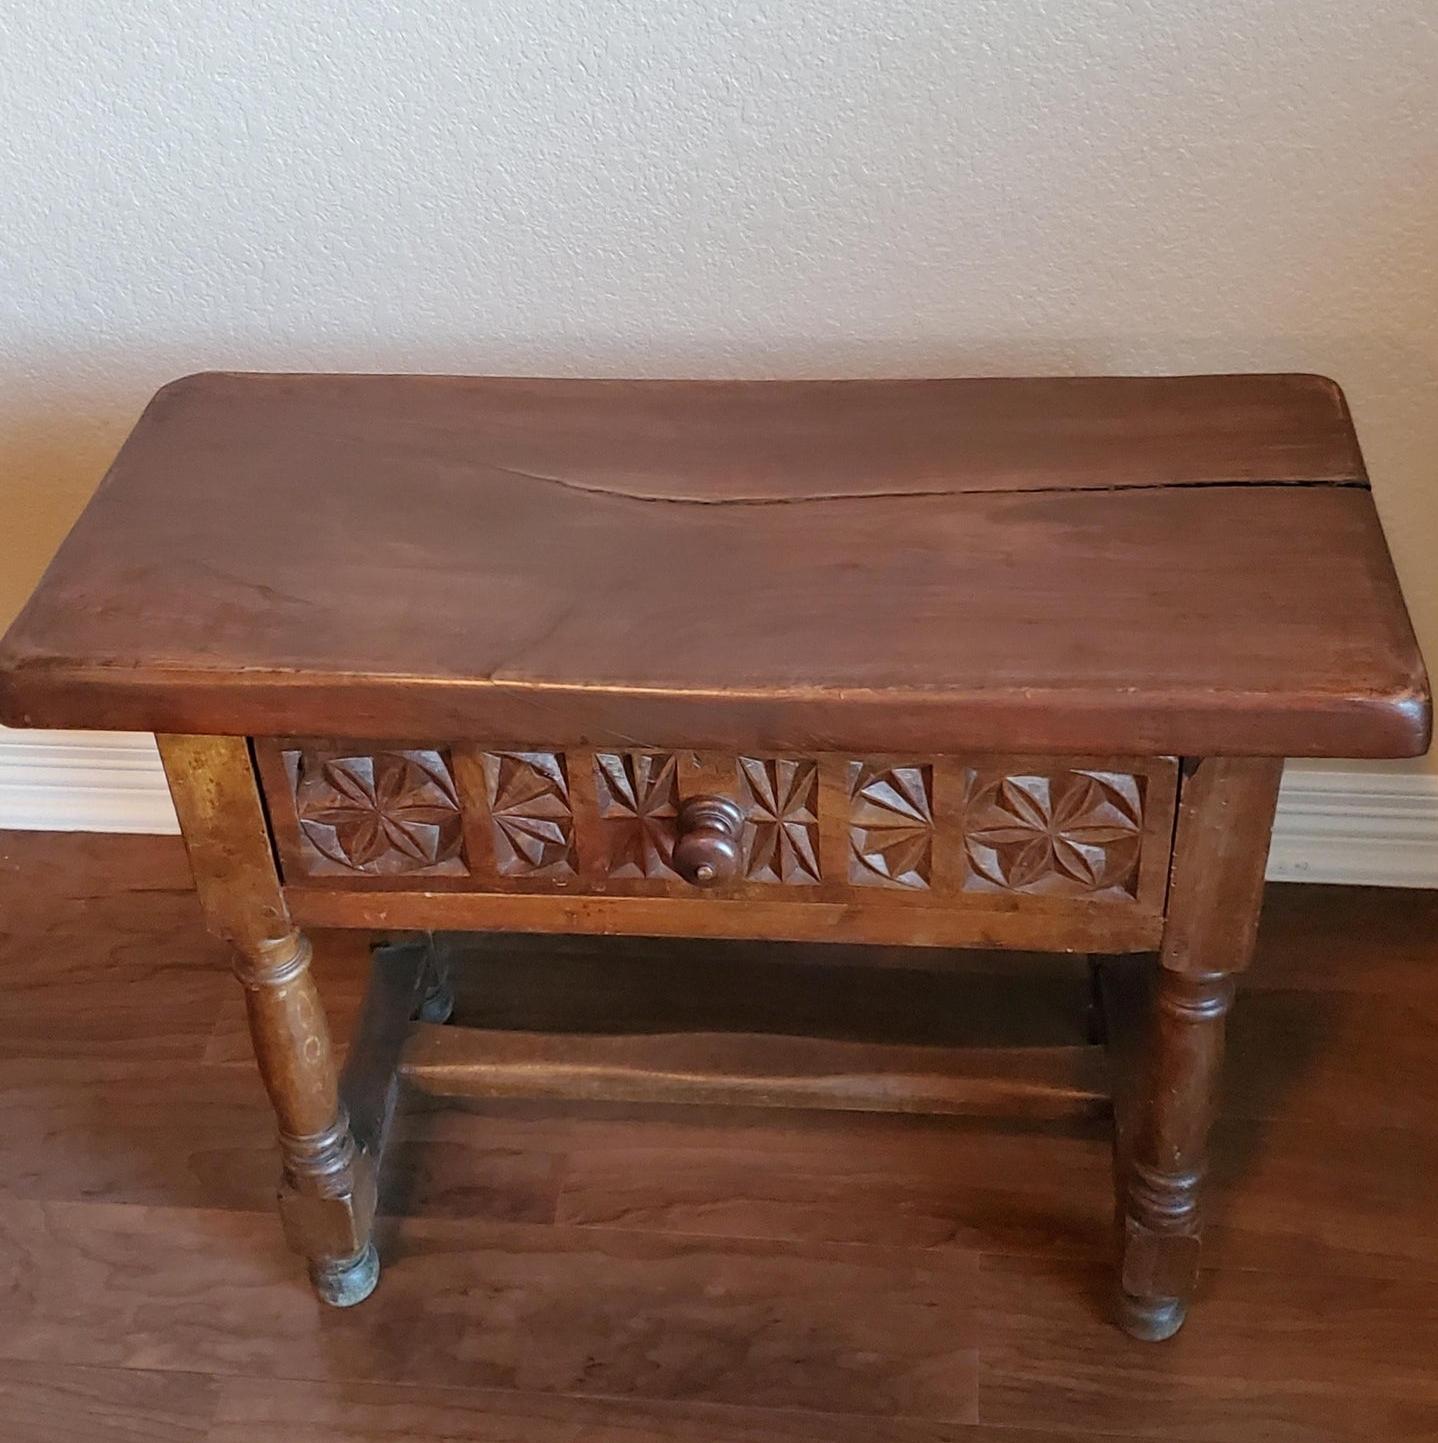 A charming rustic antique Spanish Baroque low table with beautifully aged dark rich patina. circa 1880

Versatile, today it would make for a great end table, chair side table, bedside nightstand, provide additional seating as a stool, small bench,